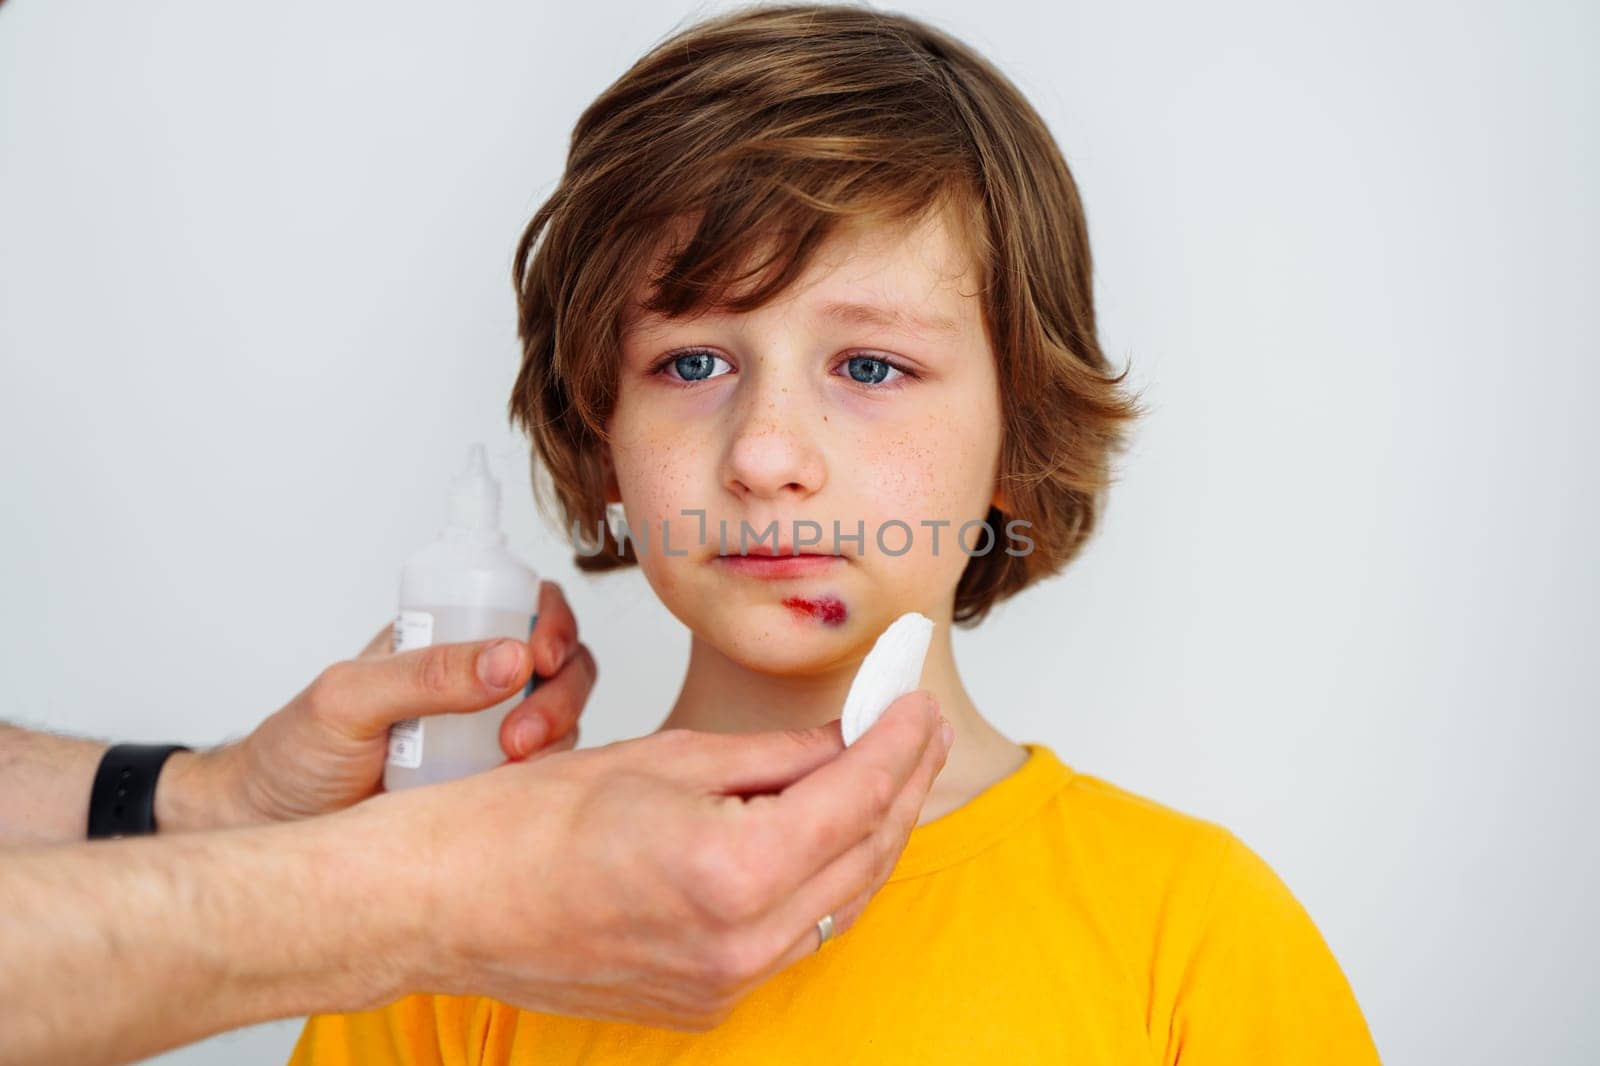 Dad doctor father treats bruised wound on his son school boy kid face. Man cleans addresses the sore wound on child face on white background with copy space for text.